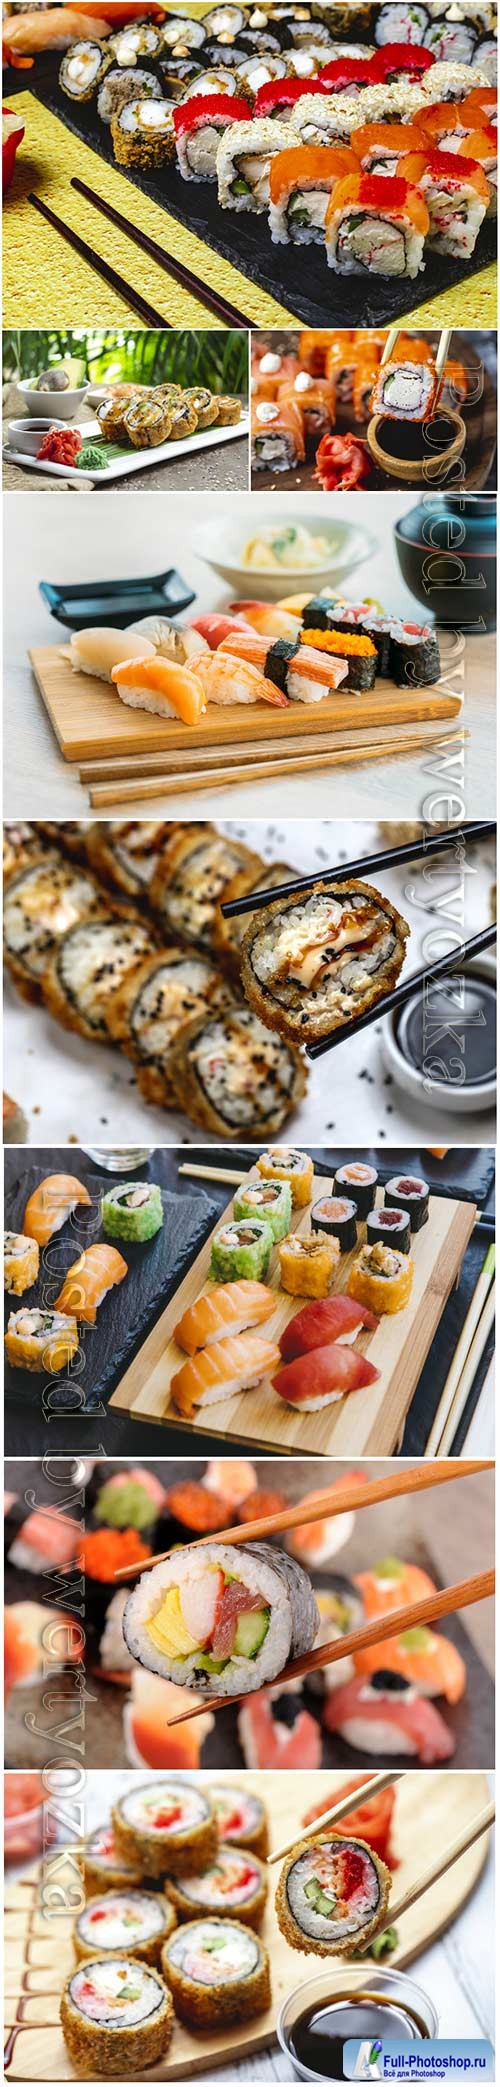 Sushi roll sets with wasabi sauce